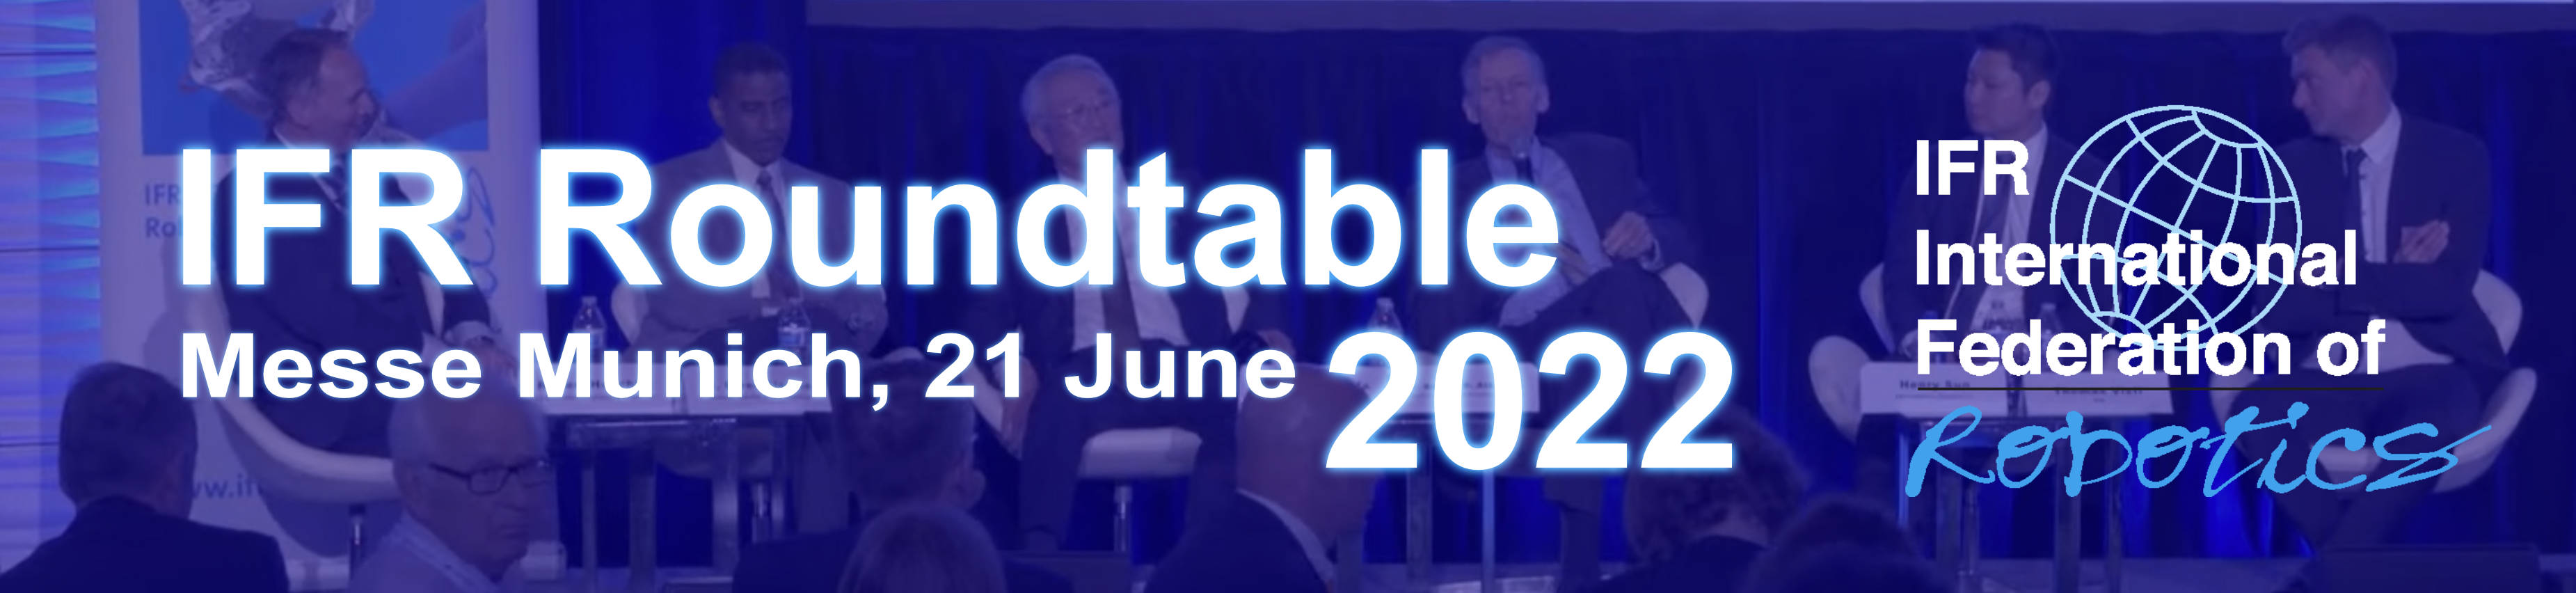 IFR Roundtable 2022 - 21 June 2022